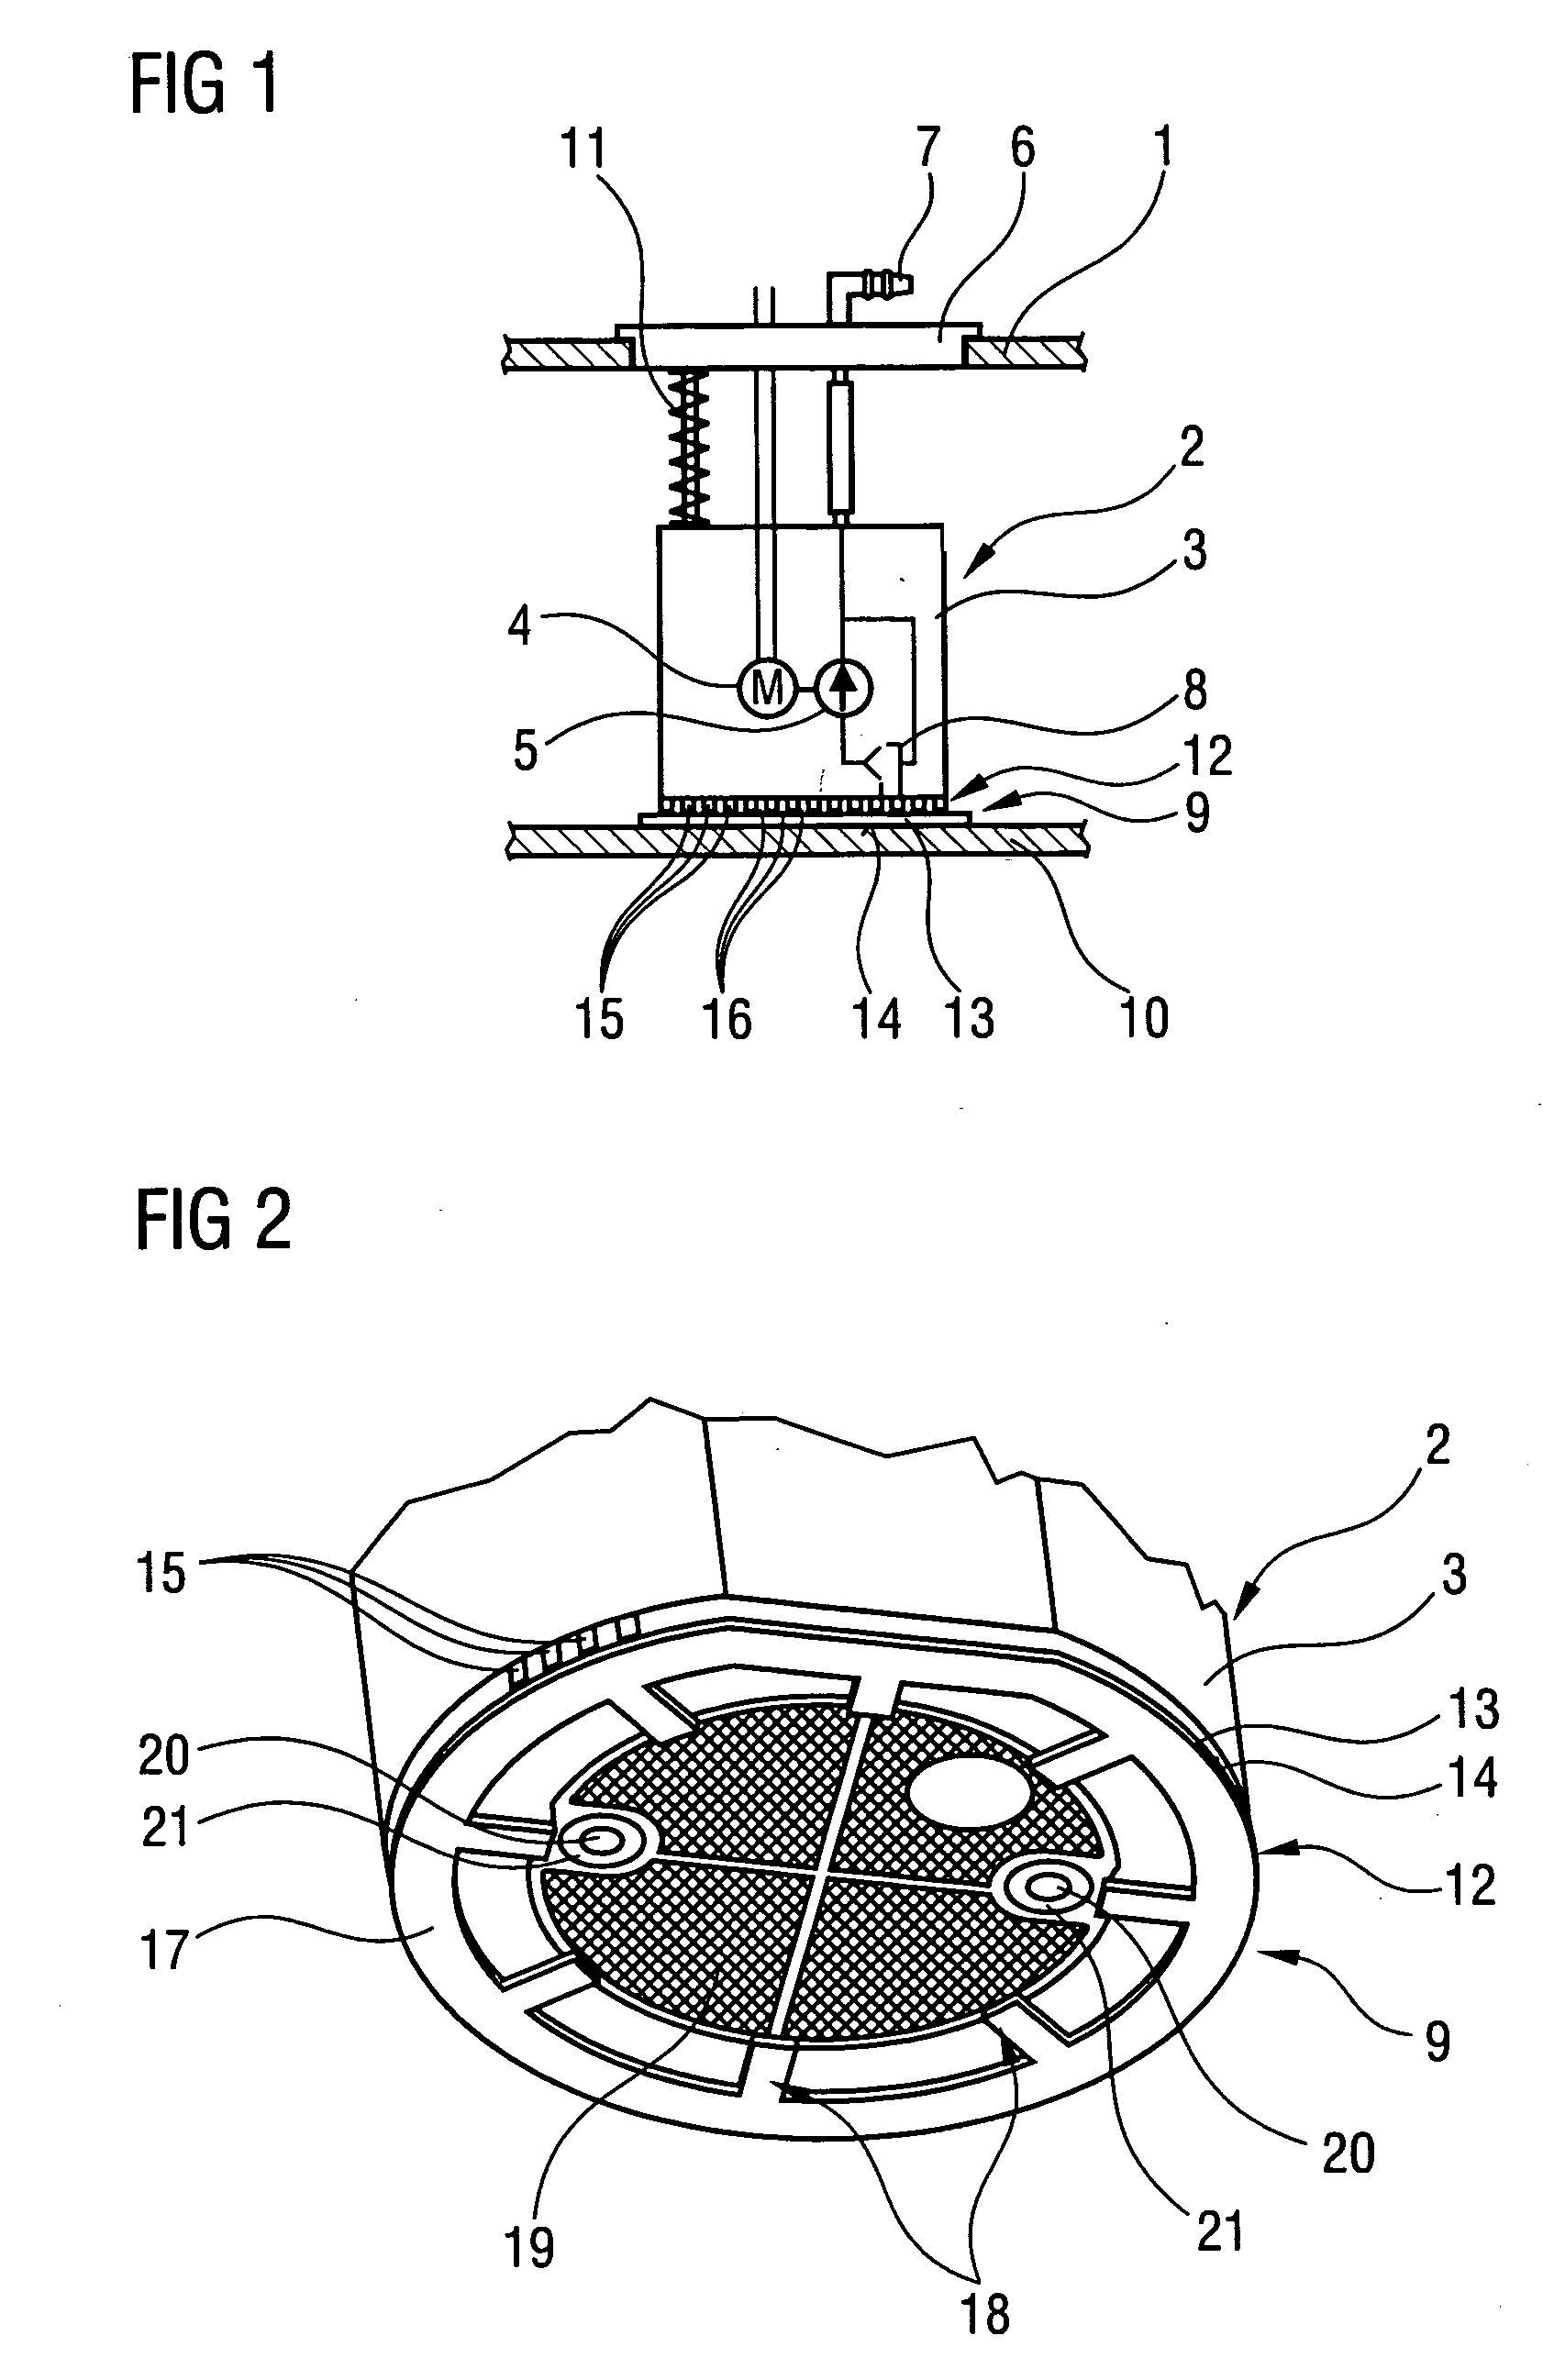 Supporting element having a supporting surface for supporting a fuel feed unit, and fuel feed unit